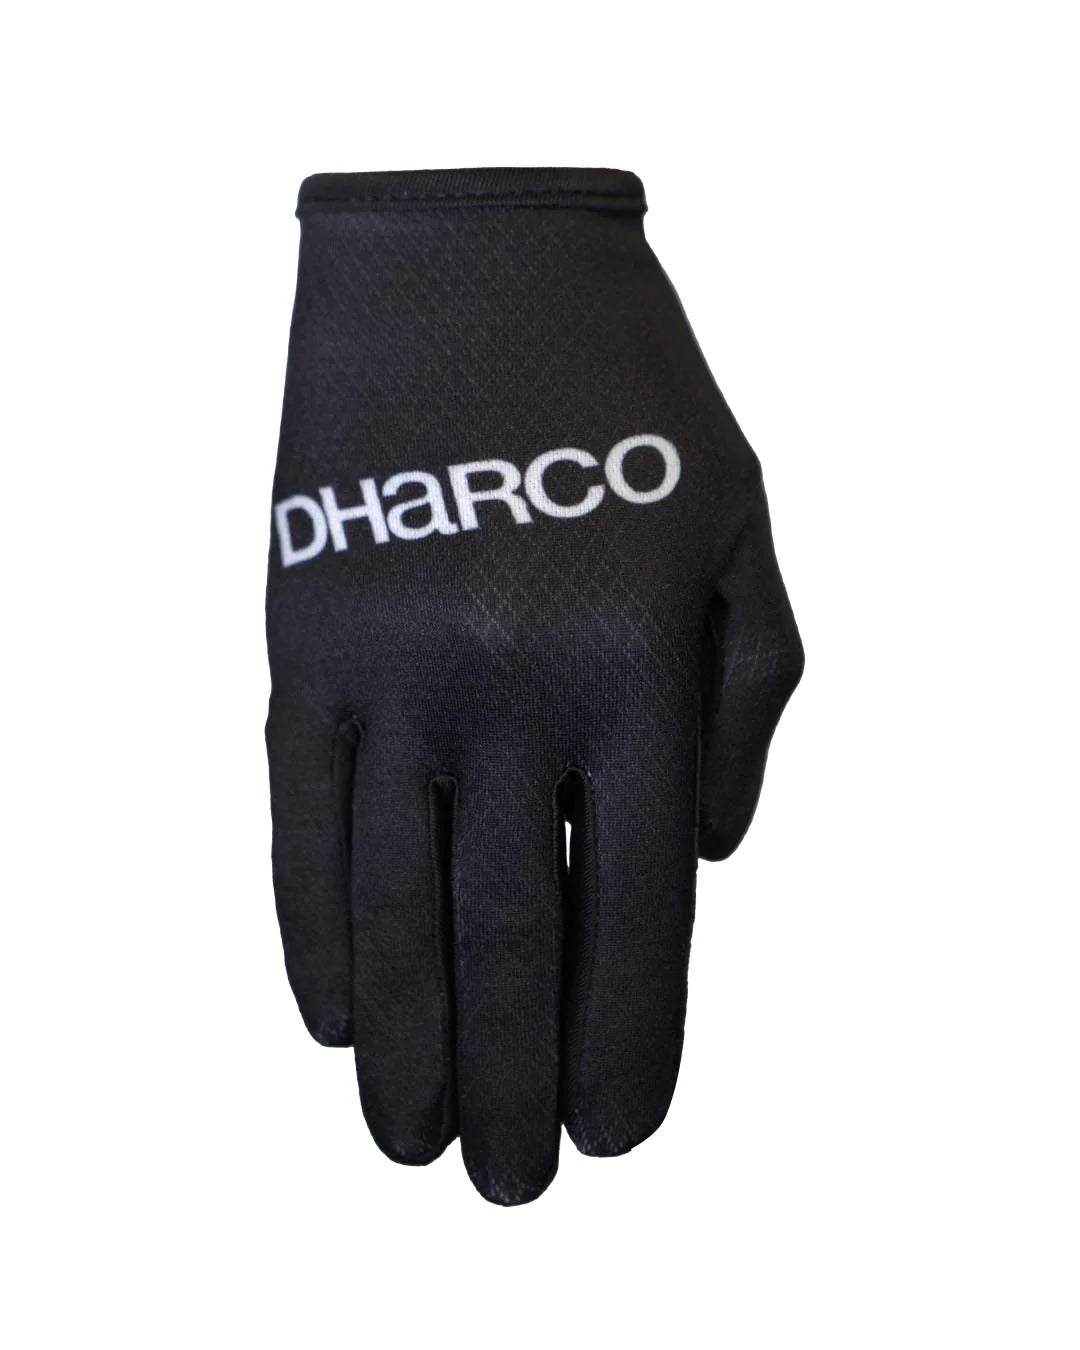 DHaRCO Youth Race Glove